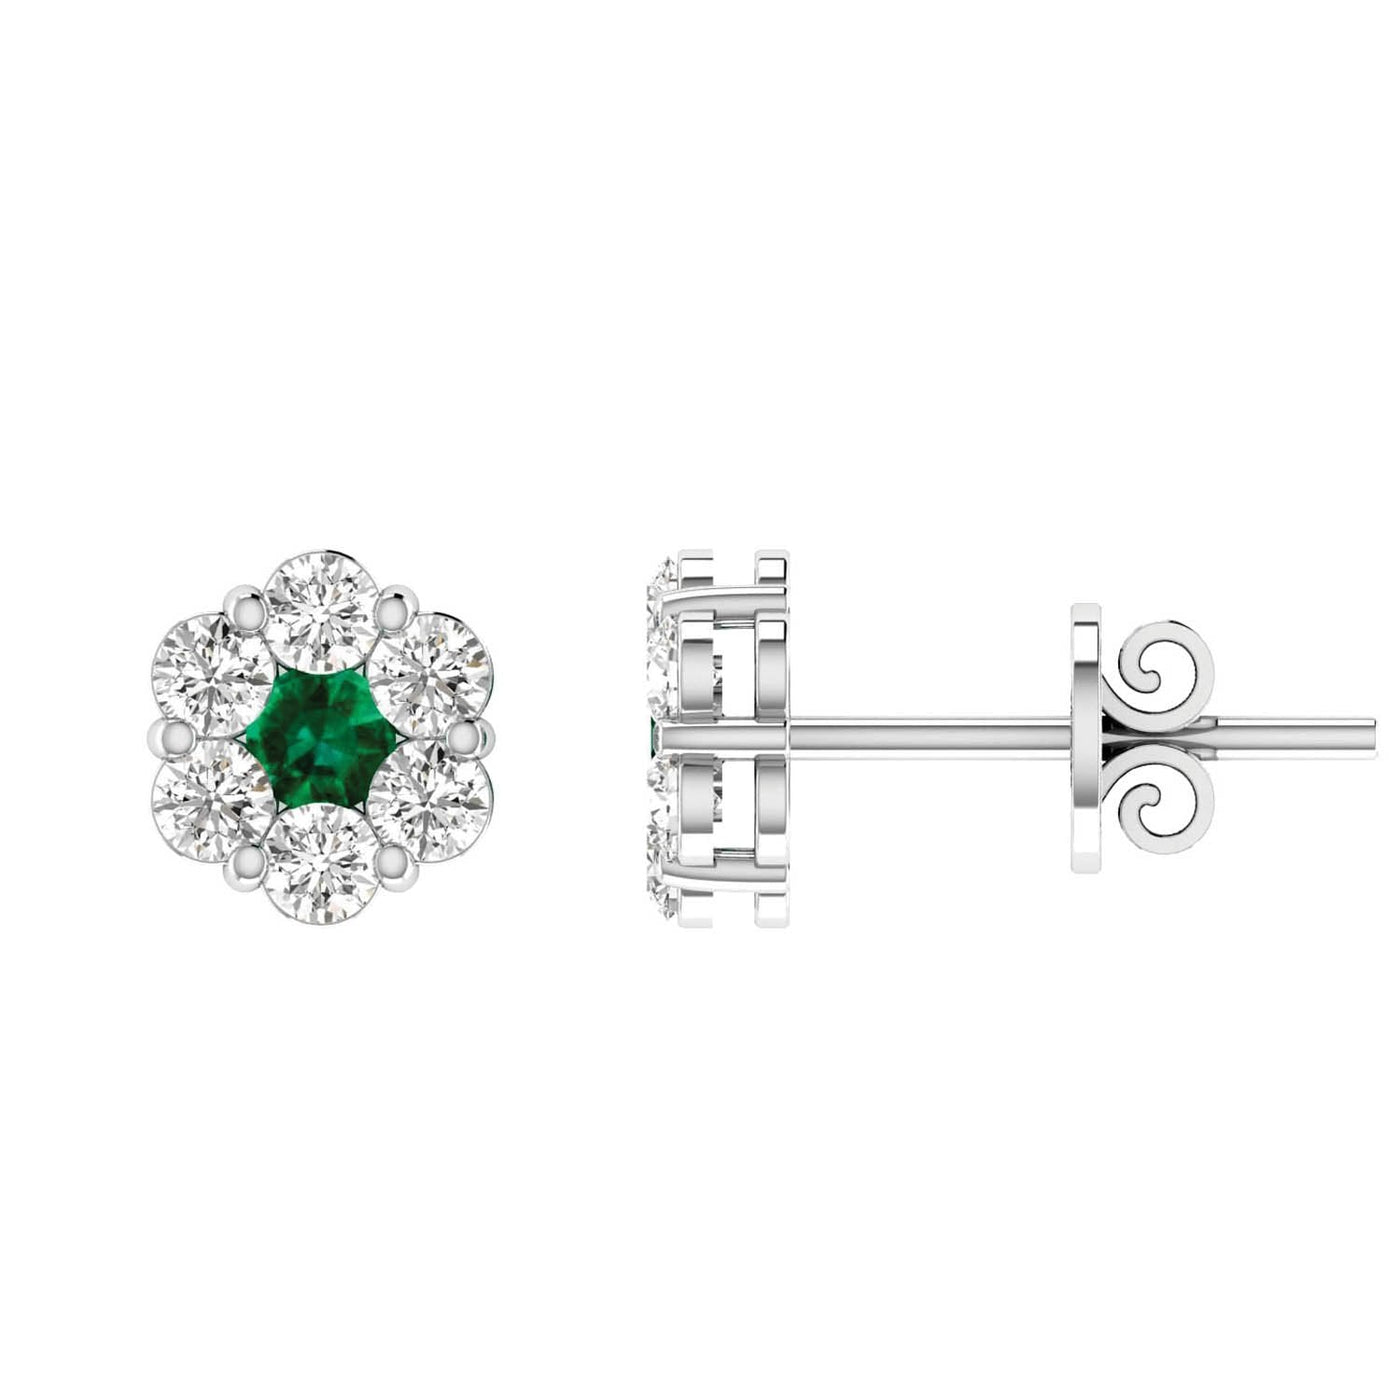 Emerald Diamond Stud Earrings with 0.80ct Diamonds in 9K White Gold - 9WRE100GHE